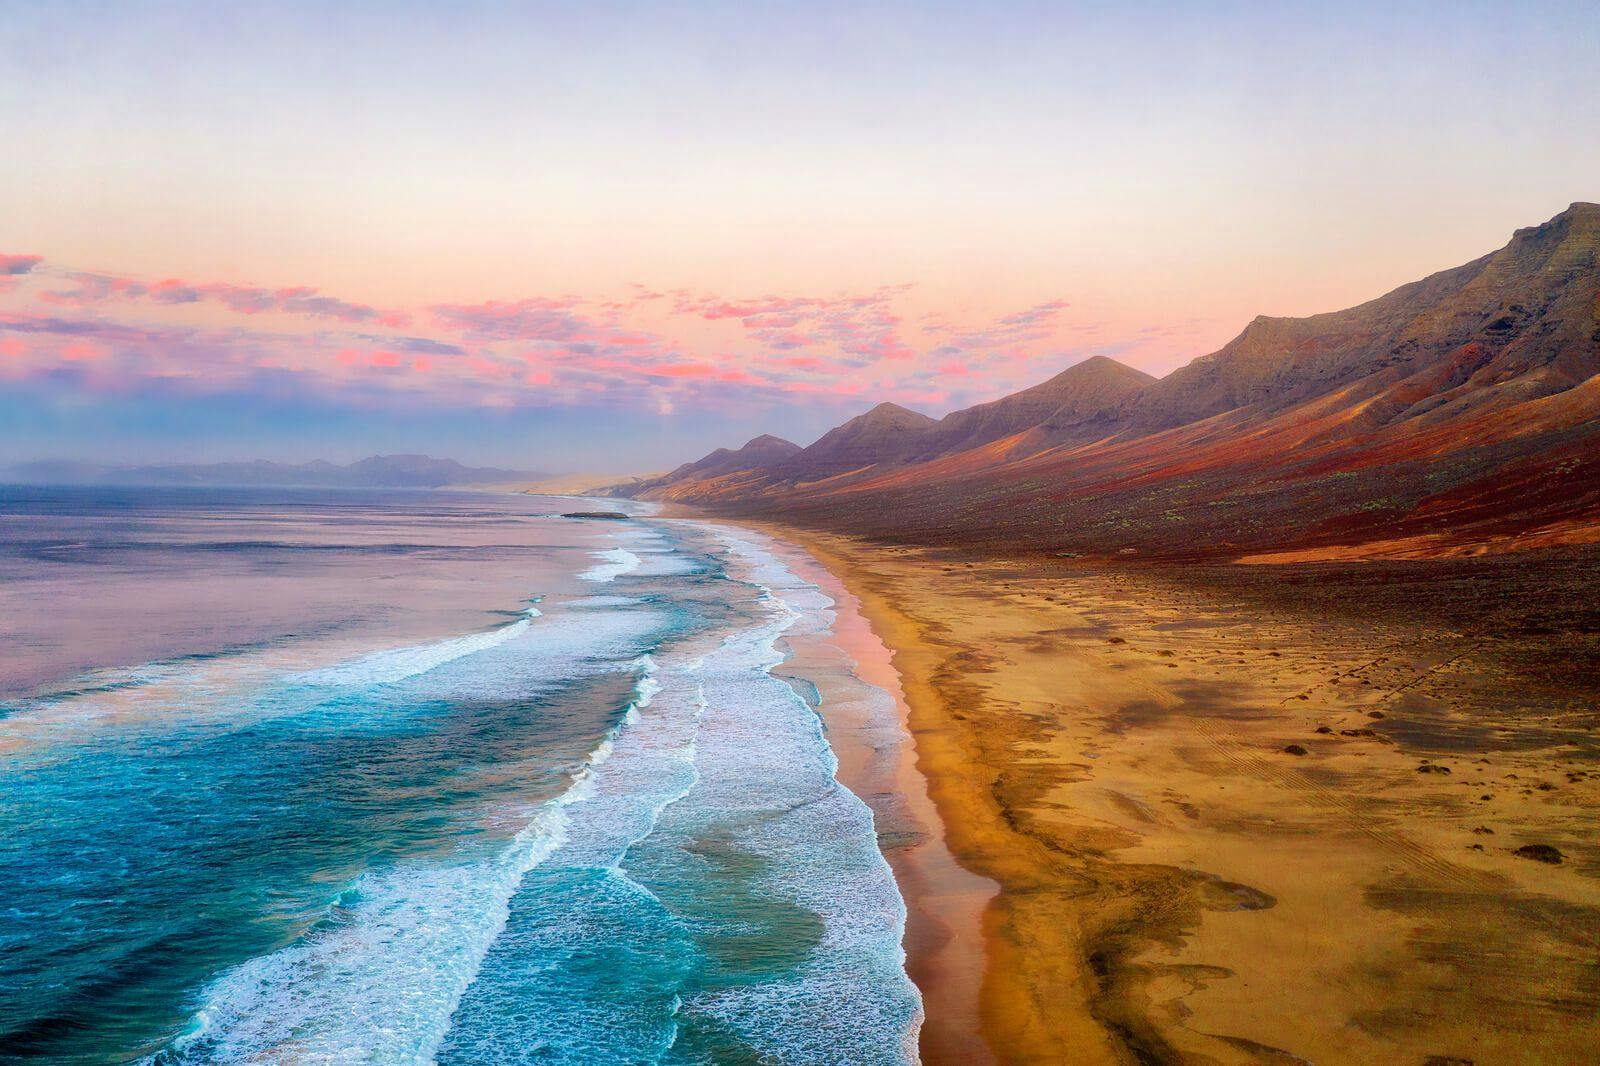 A golden sandy beach on Fuerteventura with dramatic volcanic mountains leading down into the Atlantic Ocean